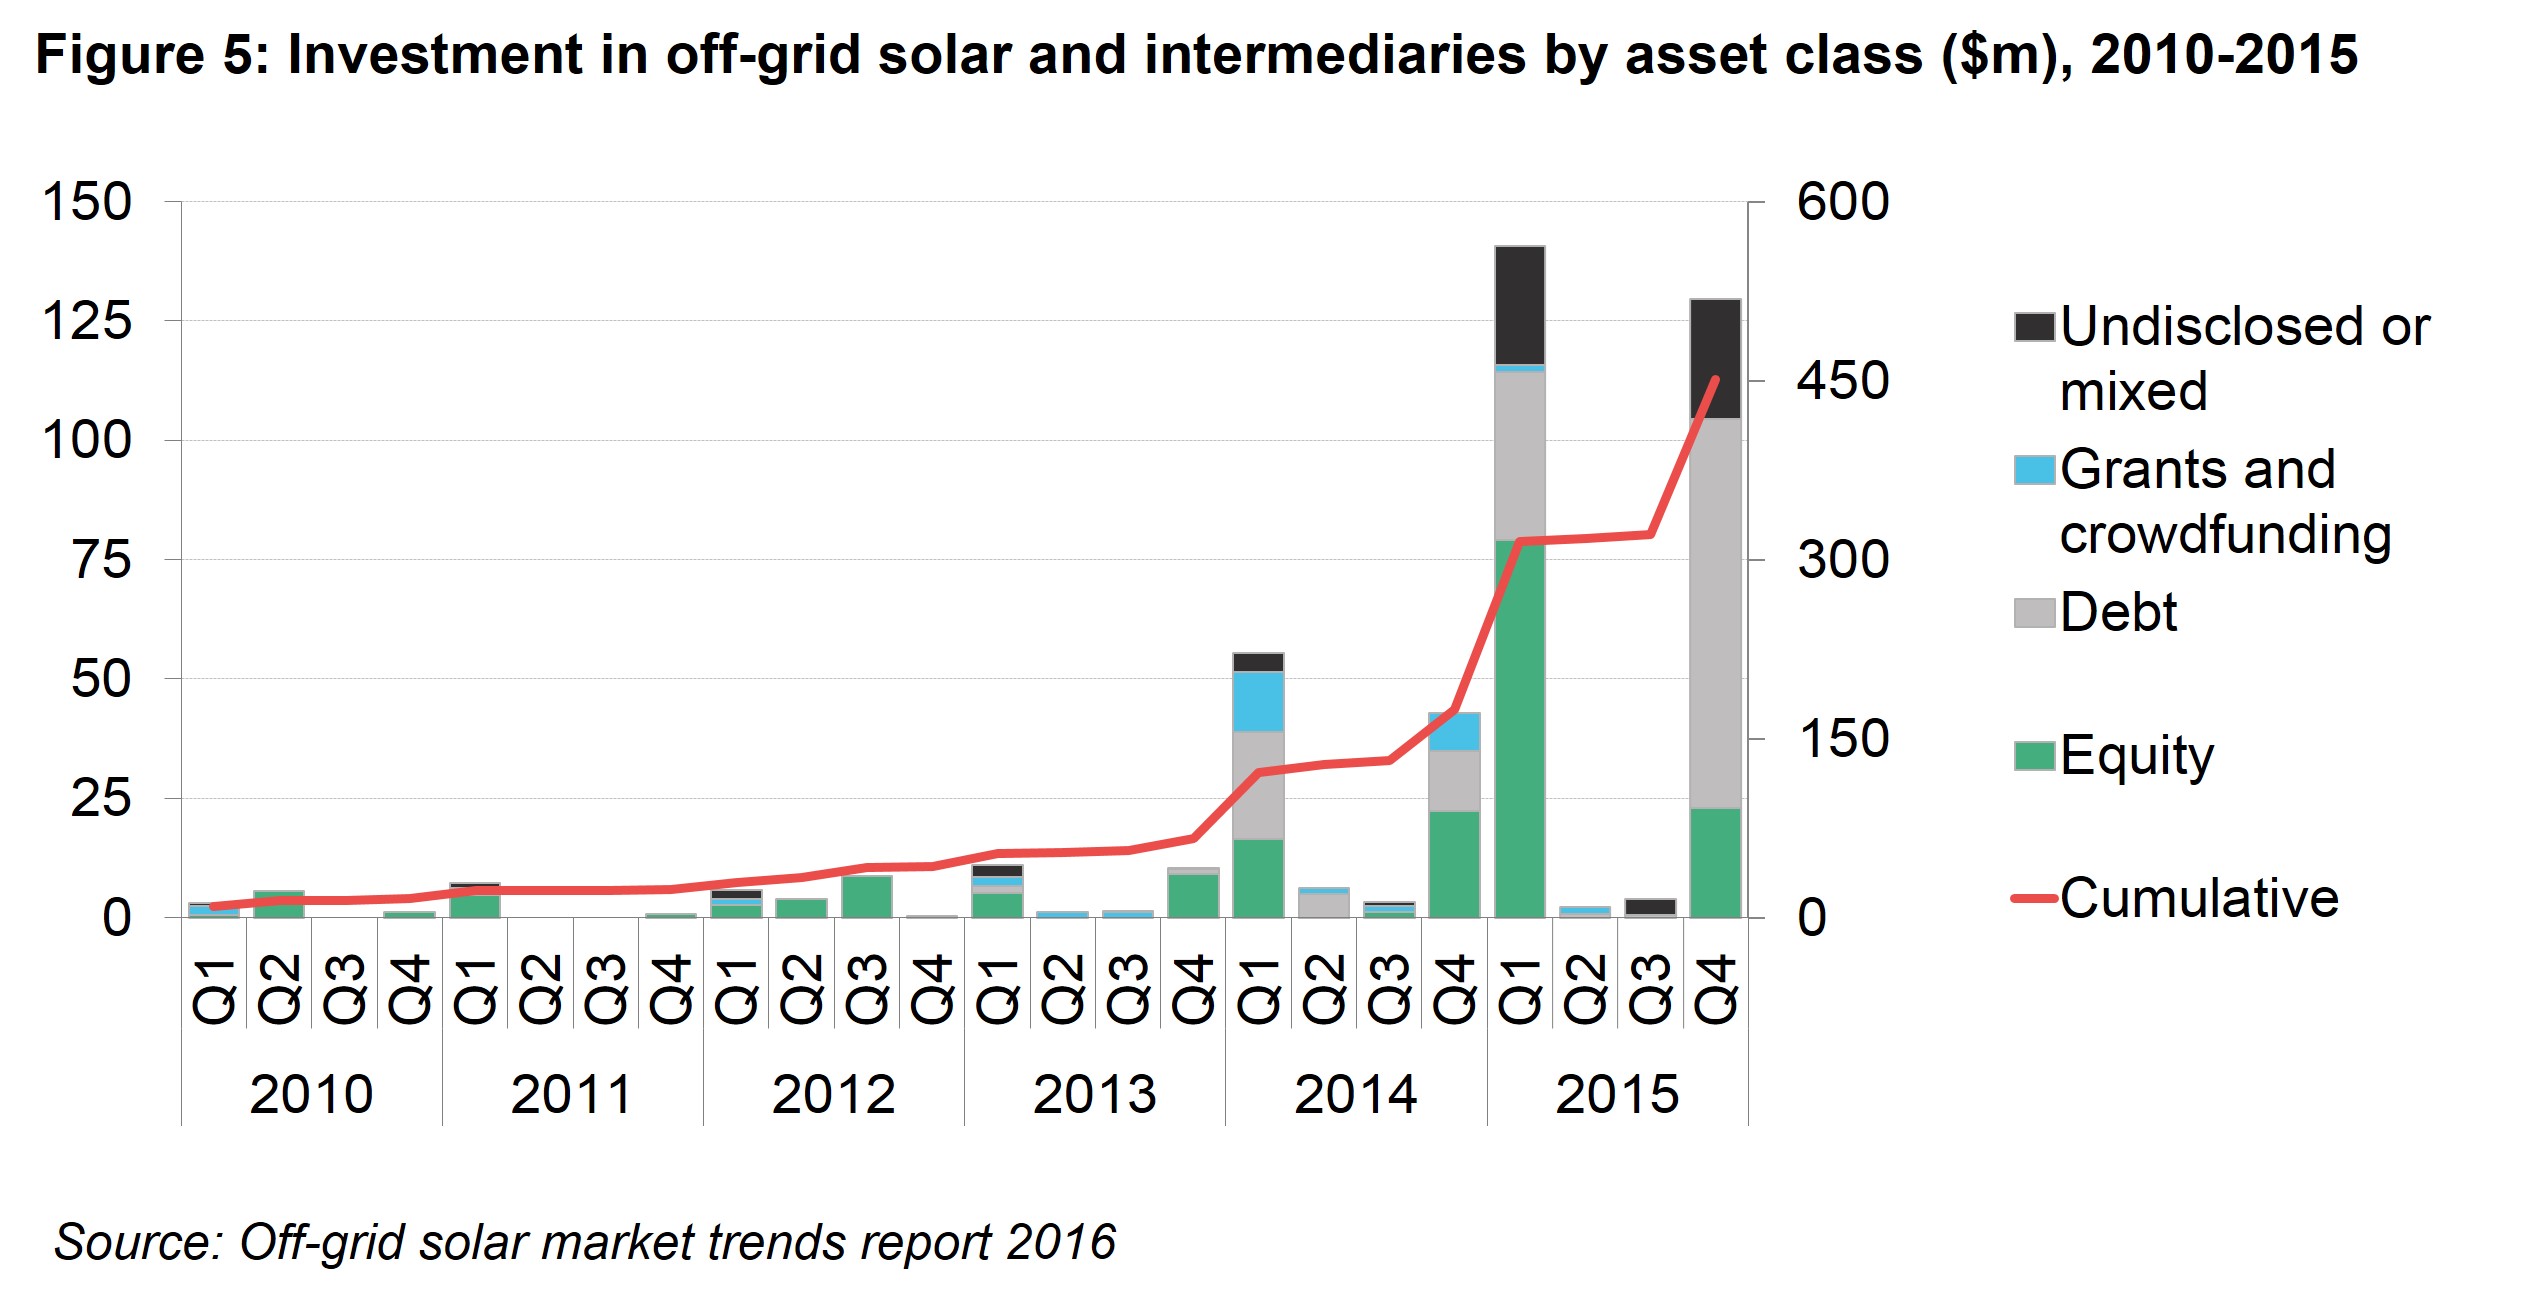 Executive Summary Fig 5 - Investment in off-grid solar and intermediaries by asset class ($m), 2010-2015